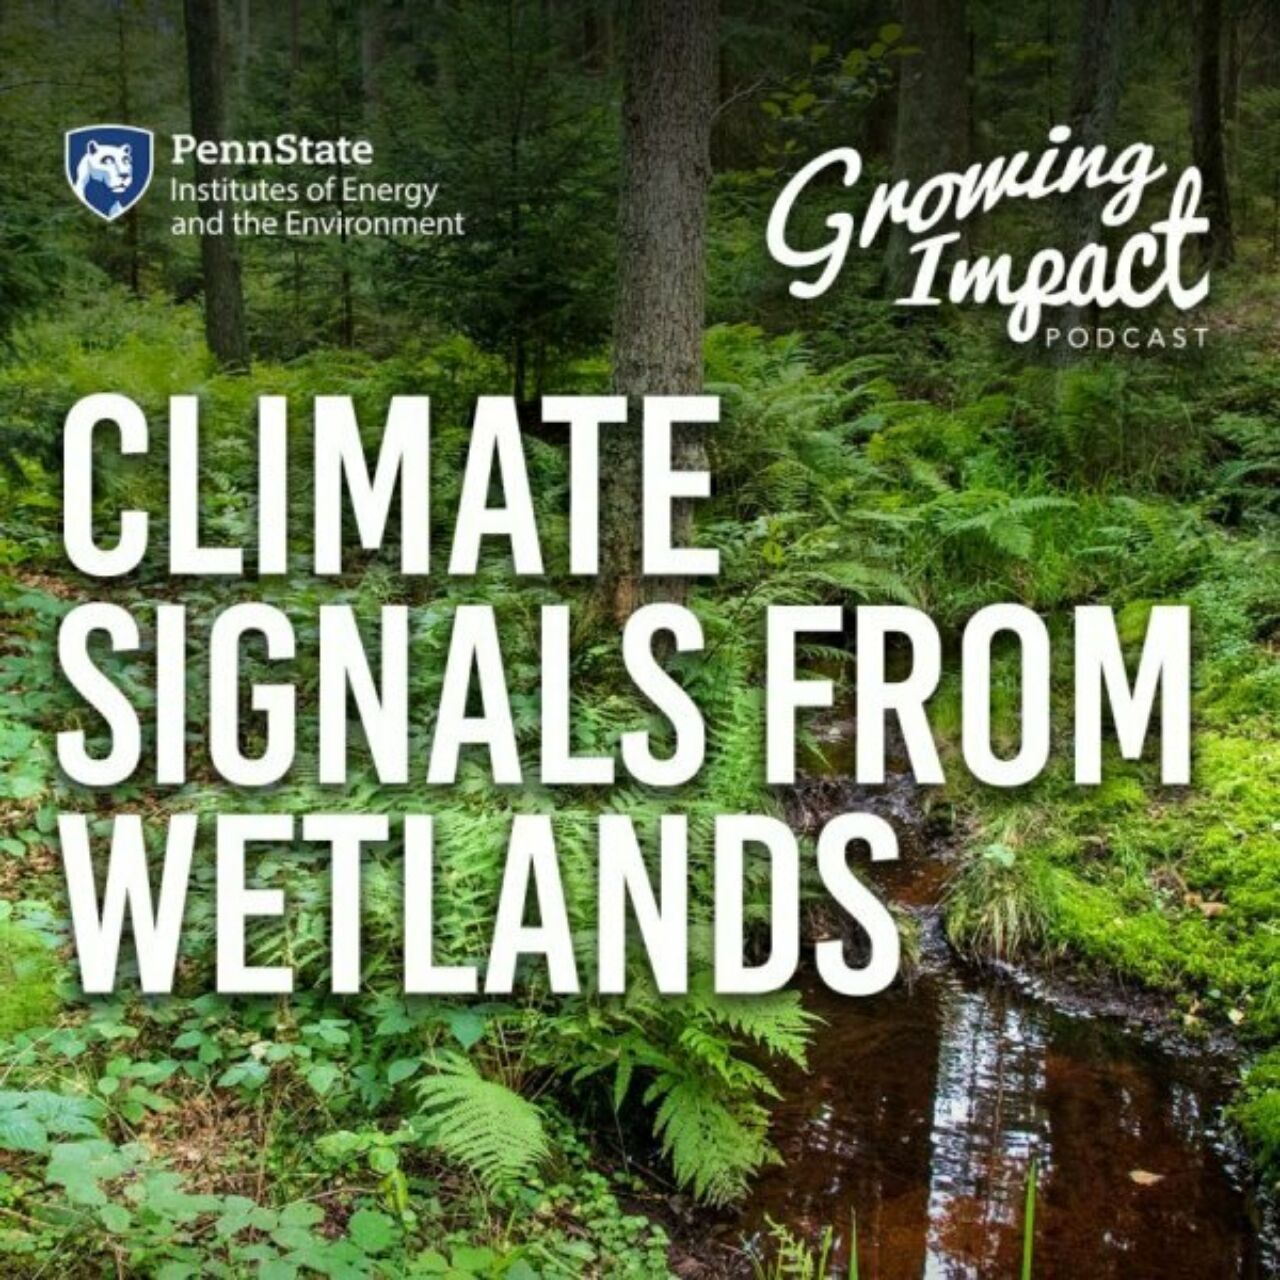 Very green ferns and other foliage in a wetland are the background with the text Climate Signals from Wetlands overtop in white and a script font logo for Growing Impact Podcast